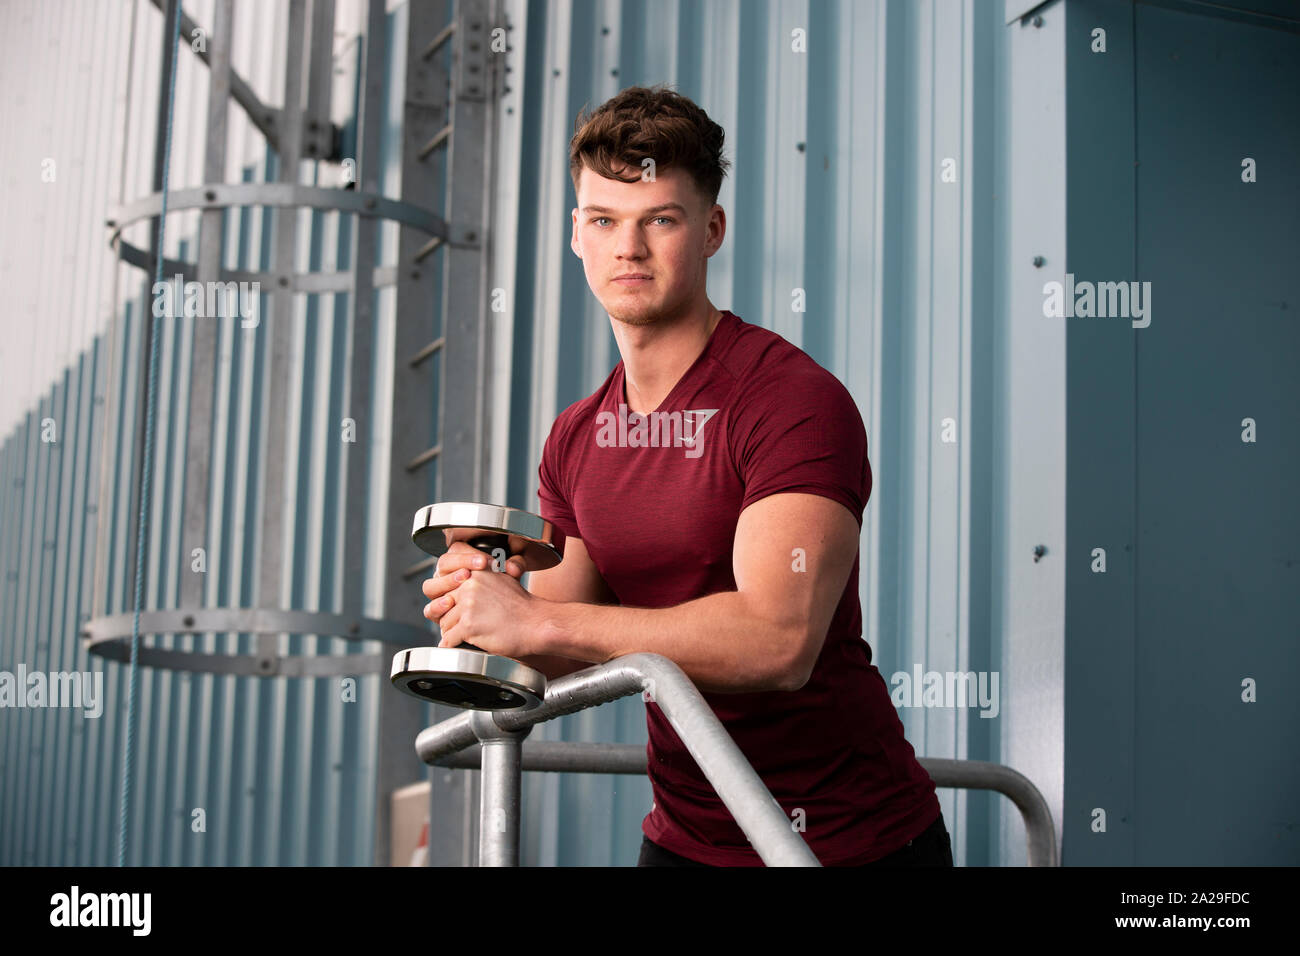 Ben Francis, founder of the gym wear company Gymshark Stock Photo